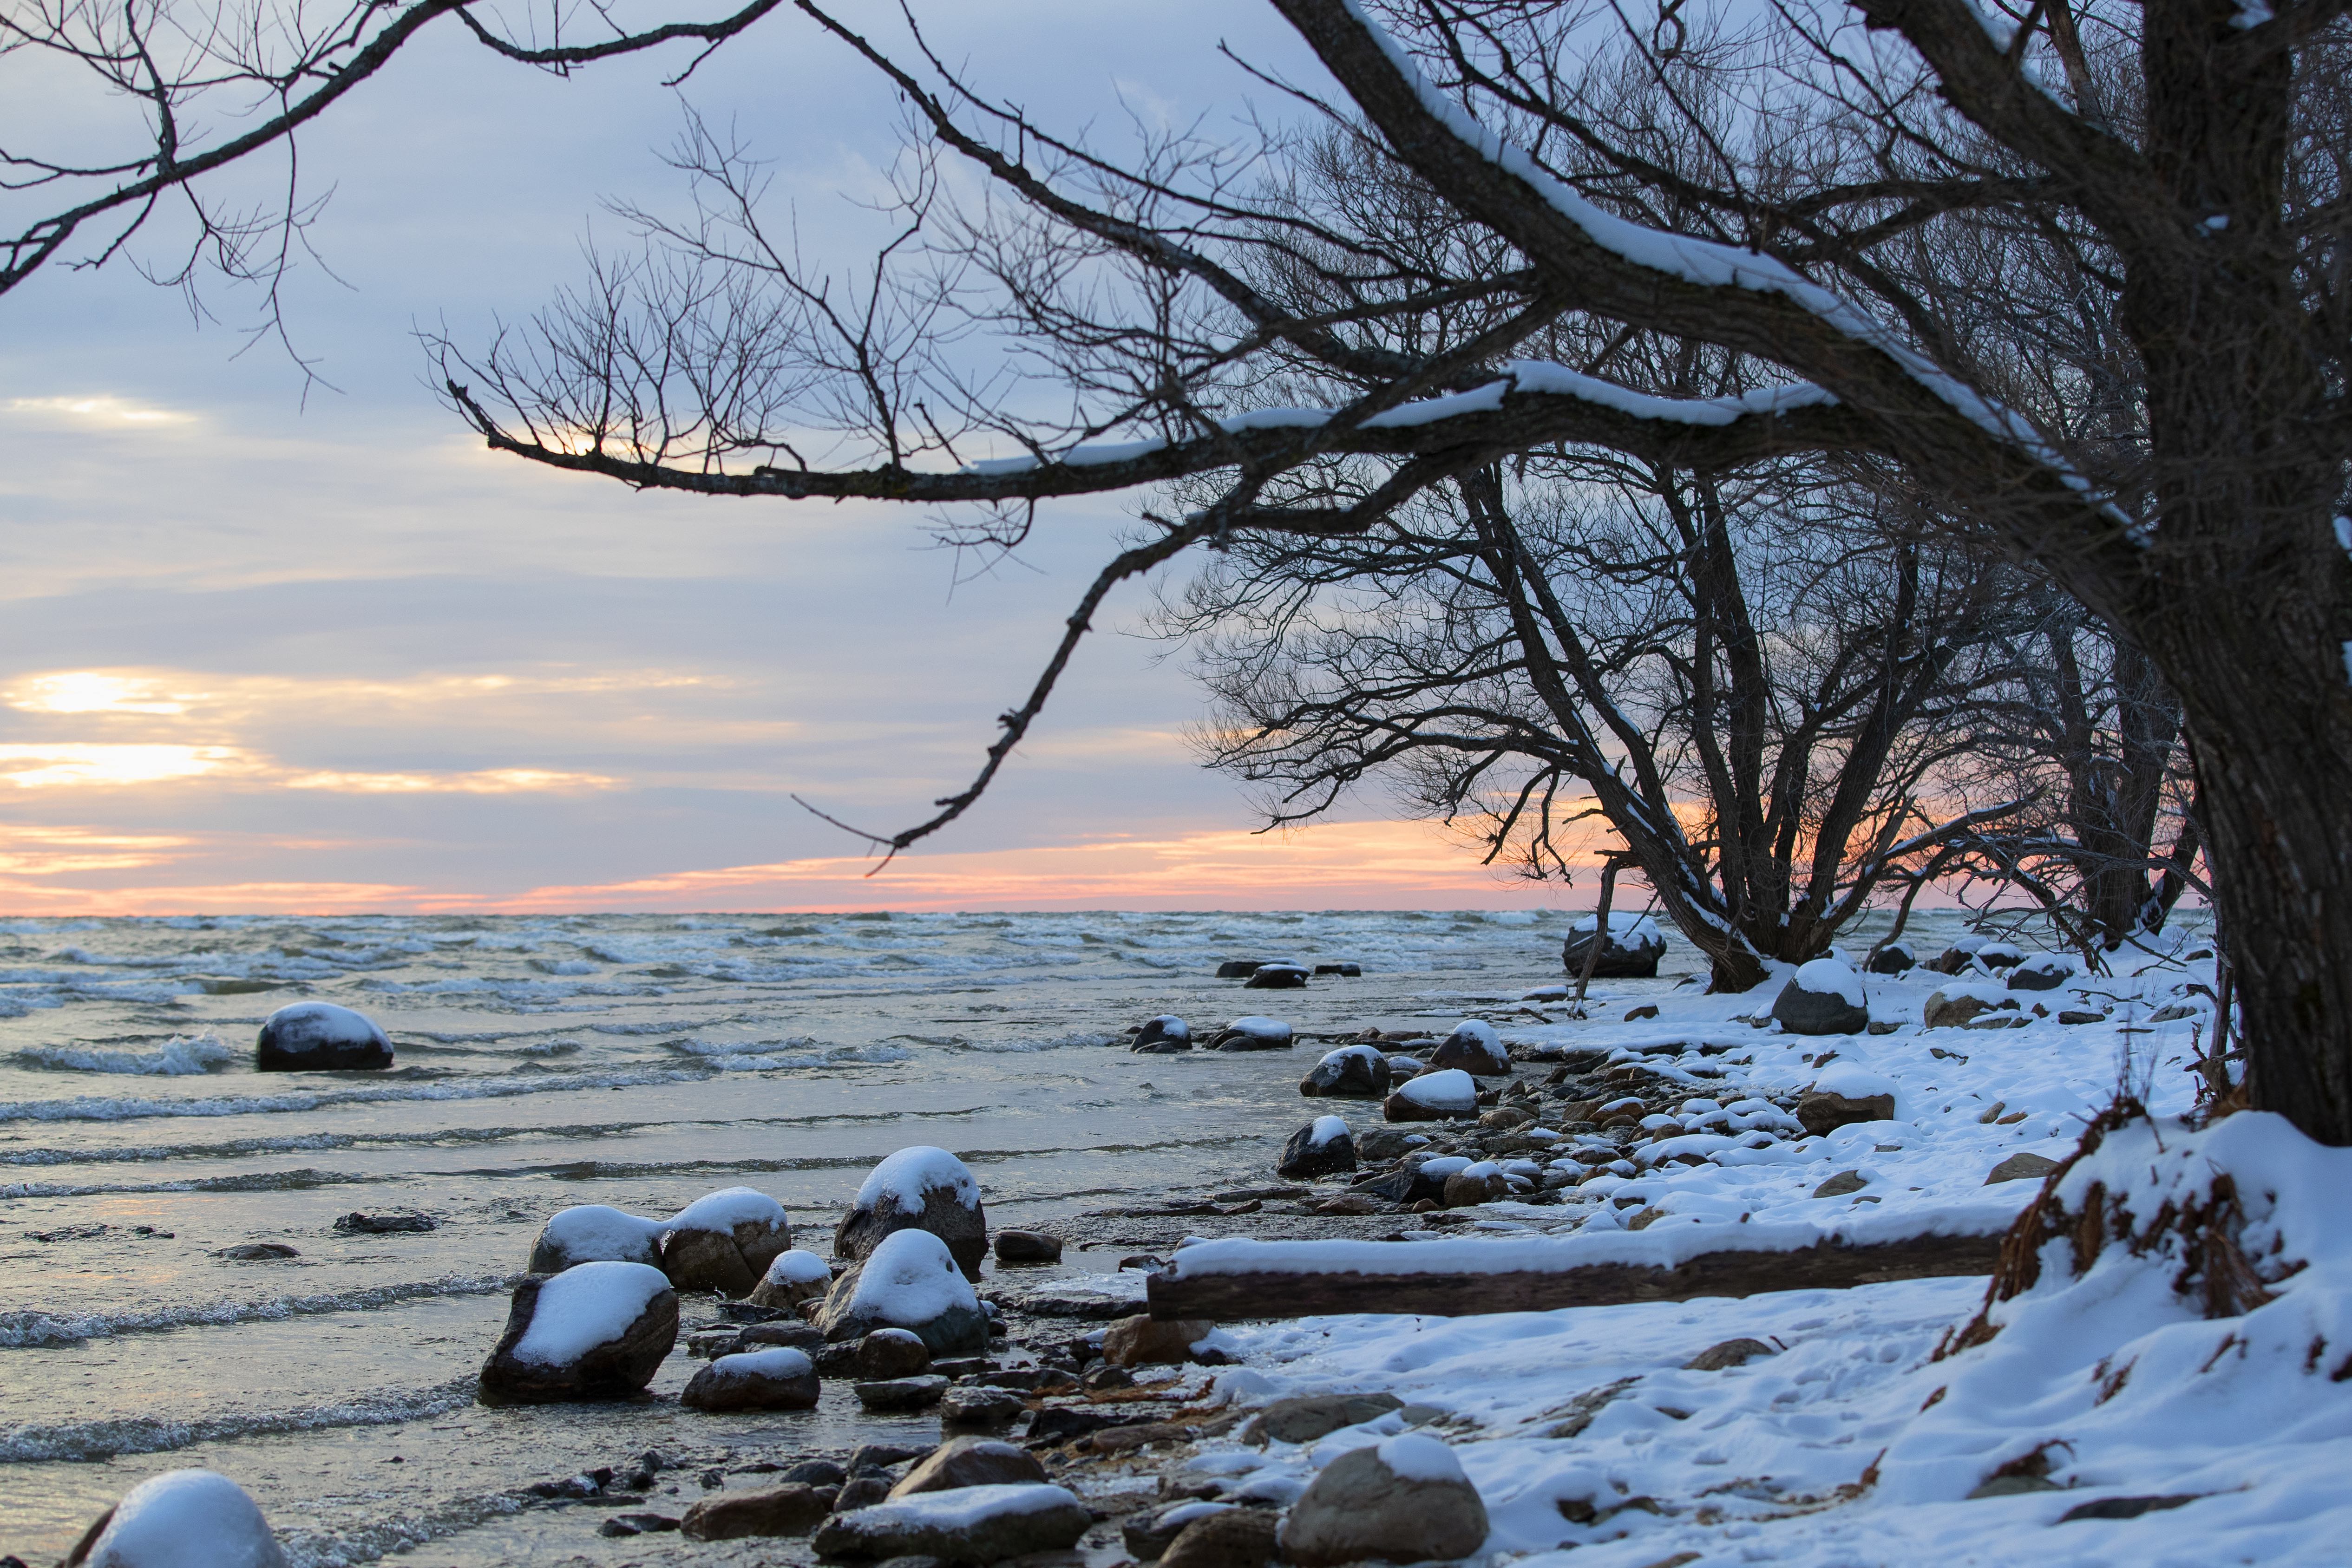 A snow-covered, rocky coastal shoreline and water.